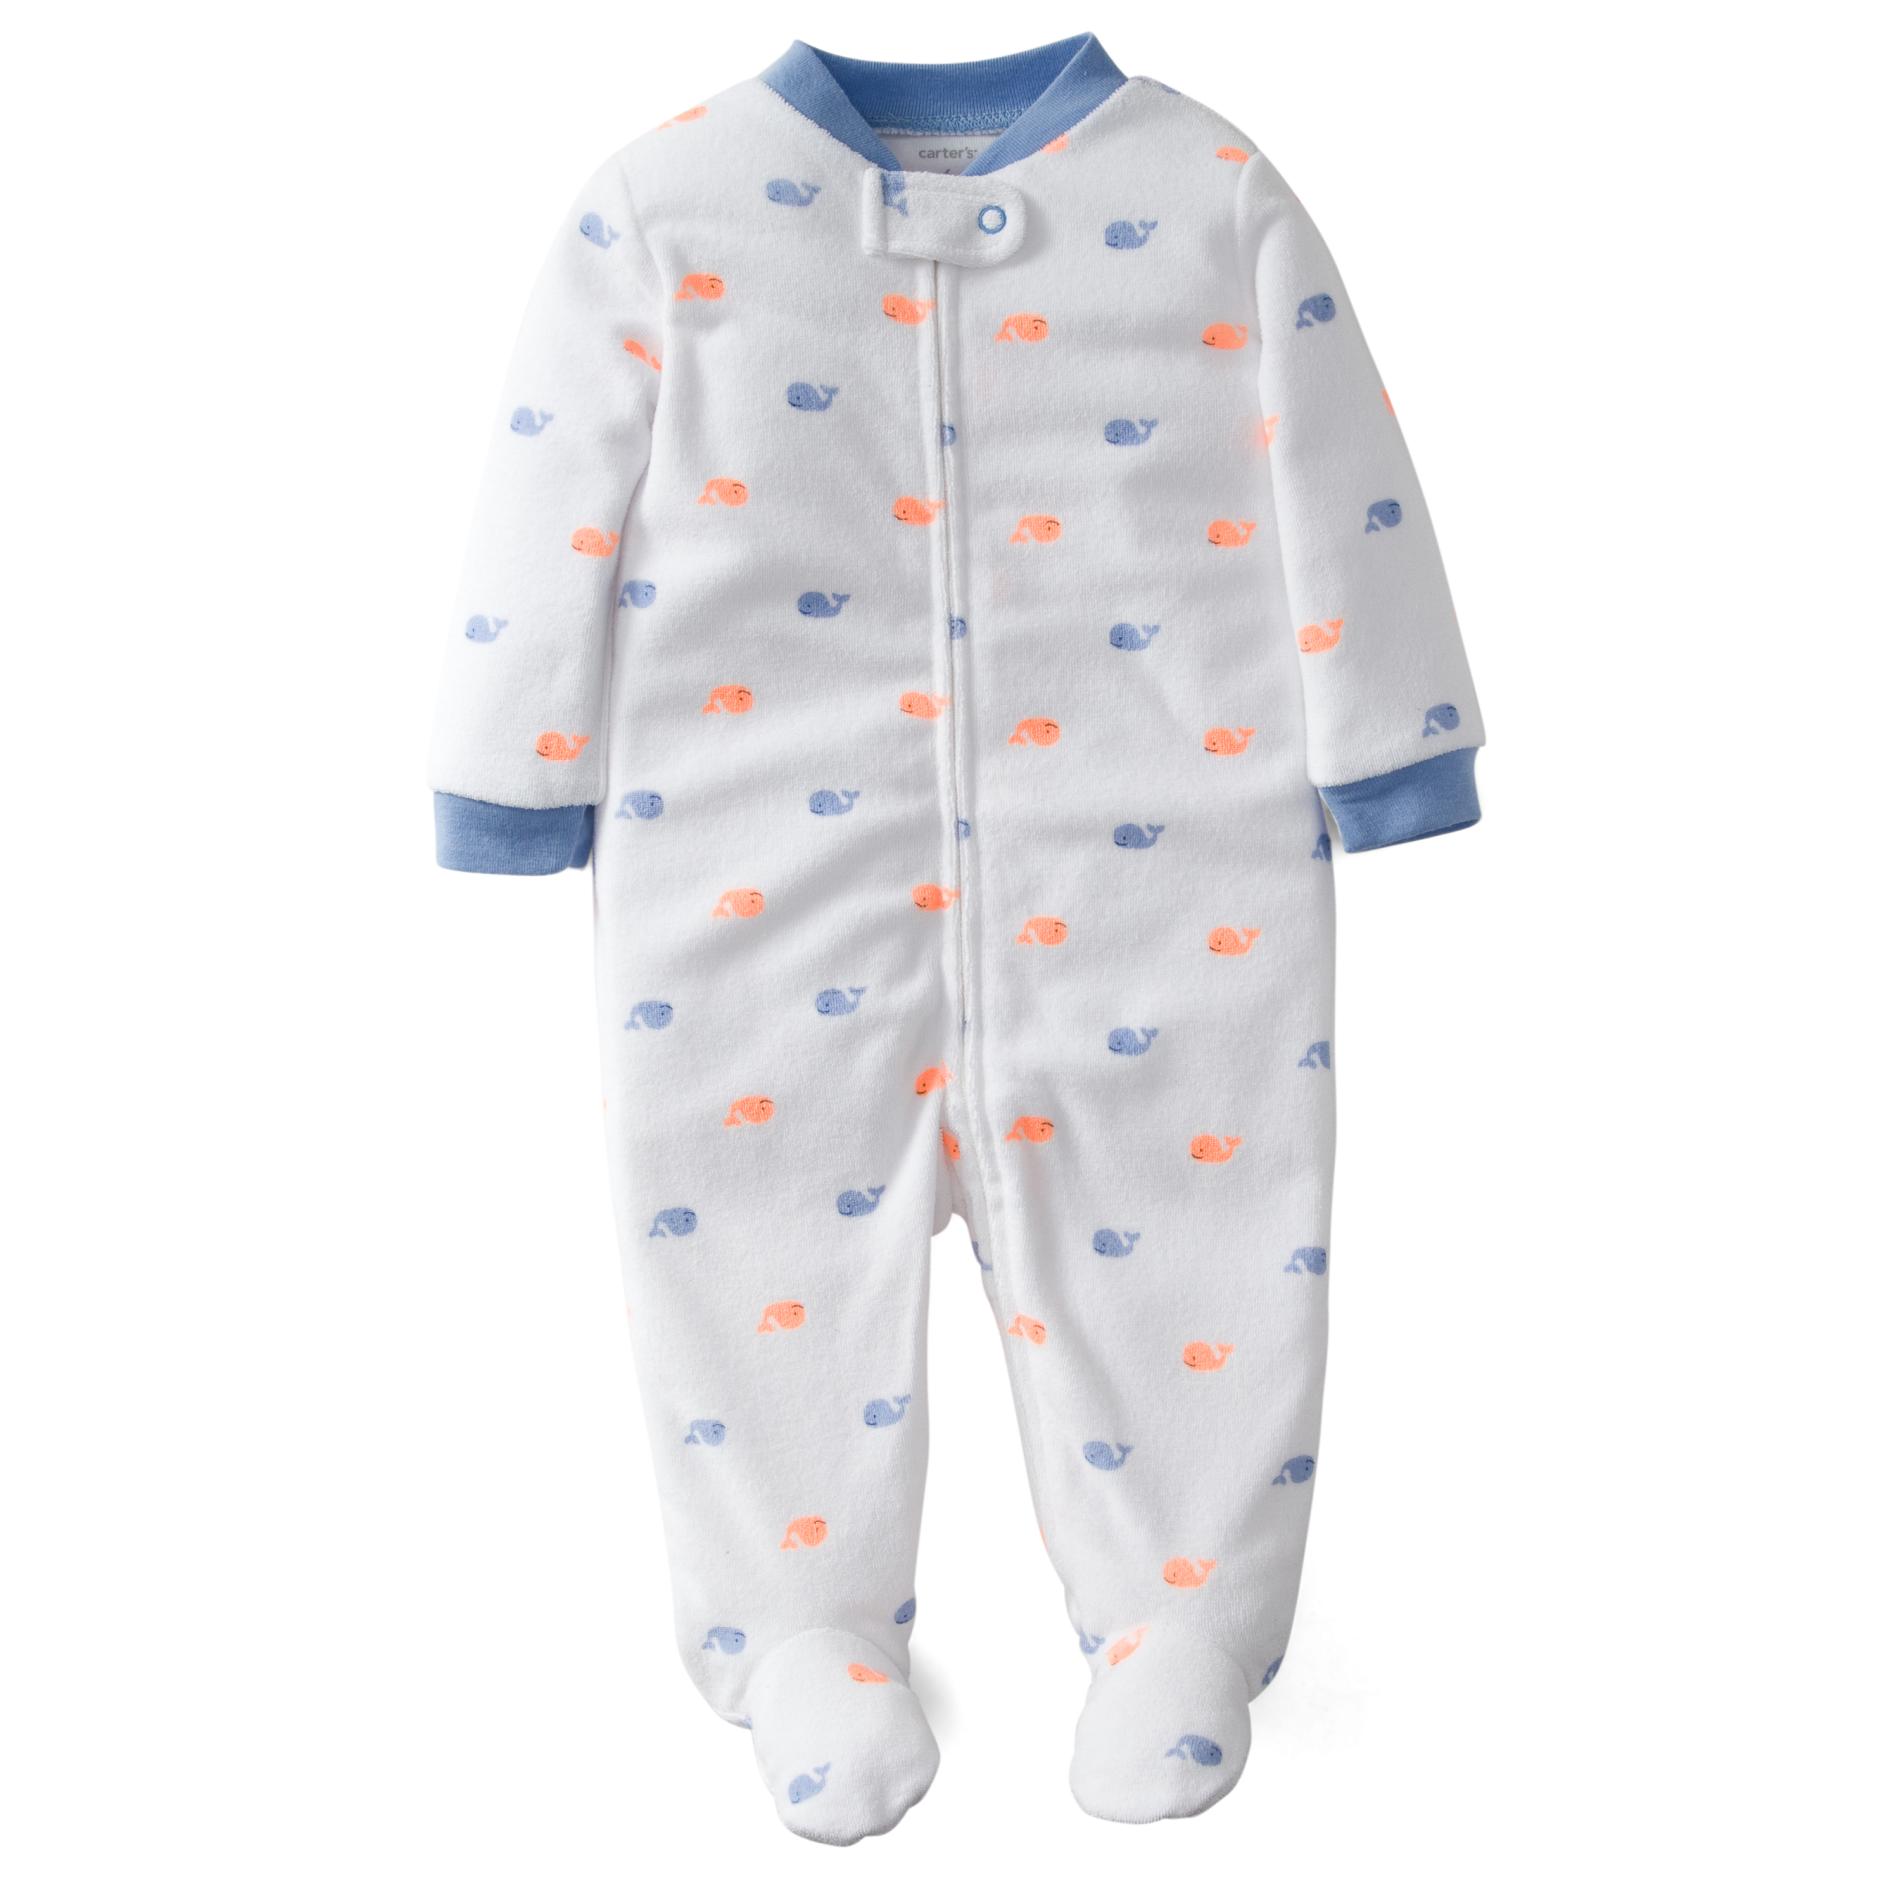 Carter's Newborn Boy's Footed Pajamas - Whales